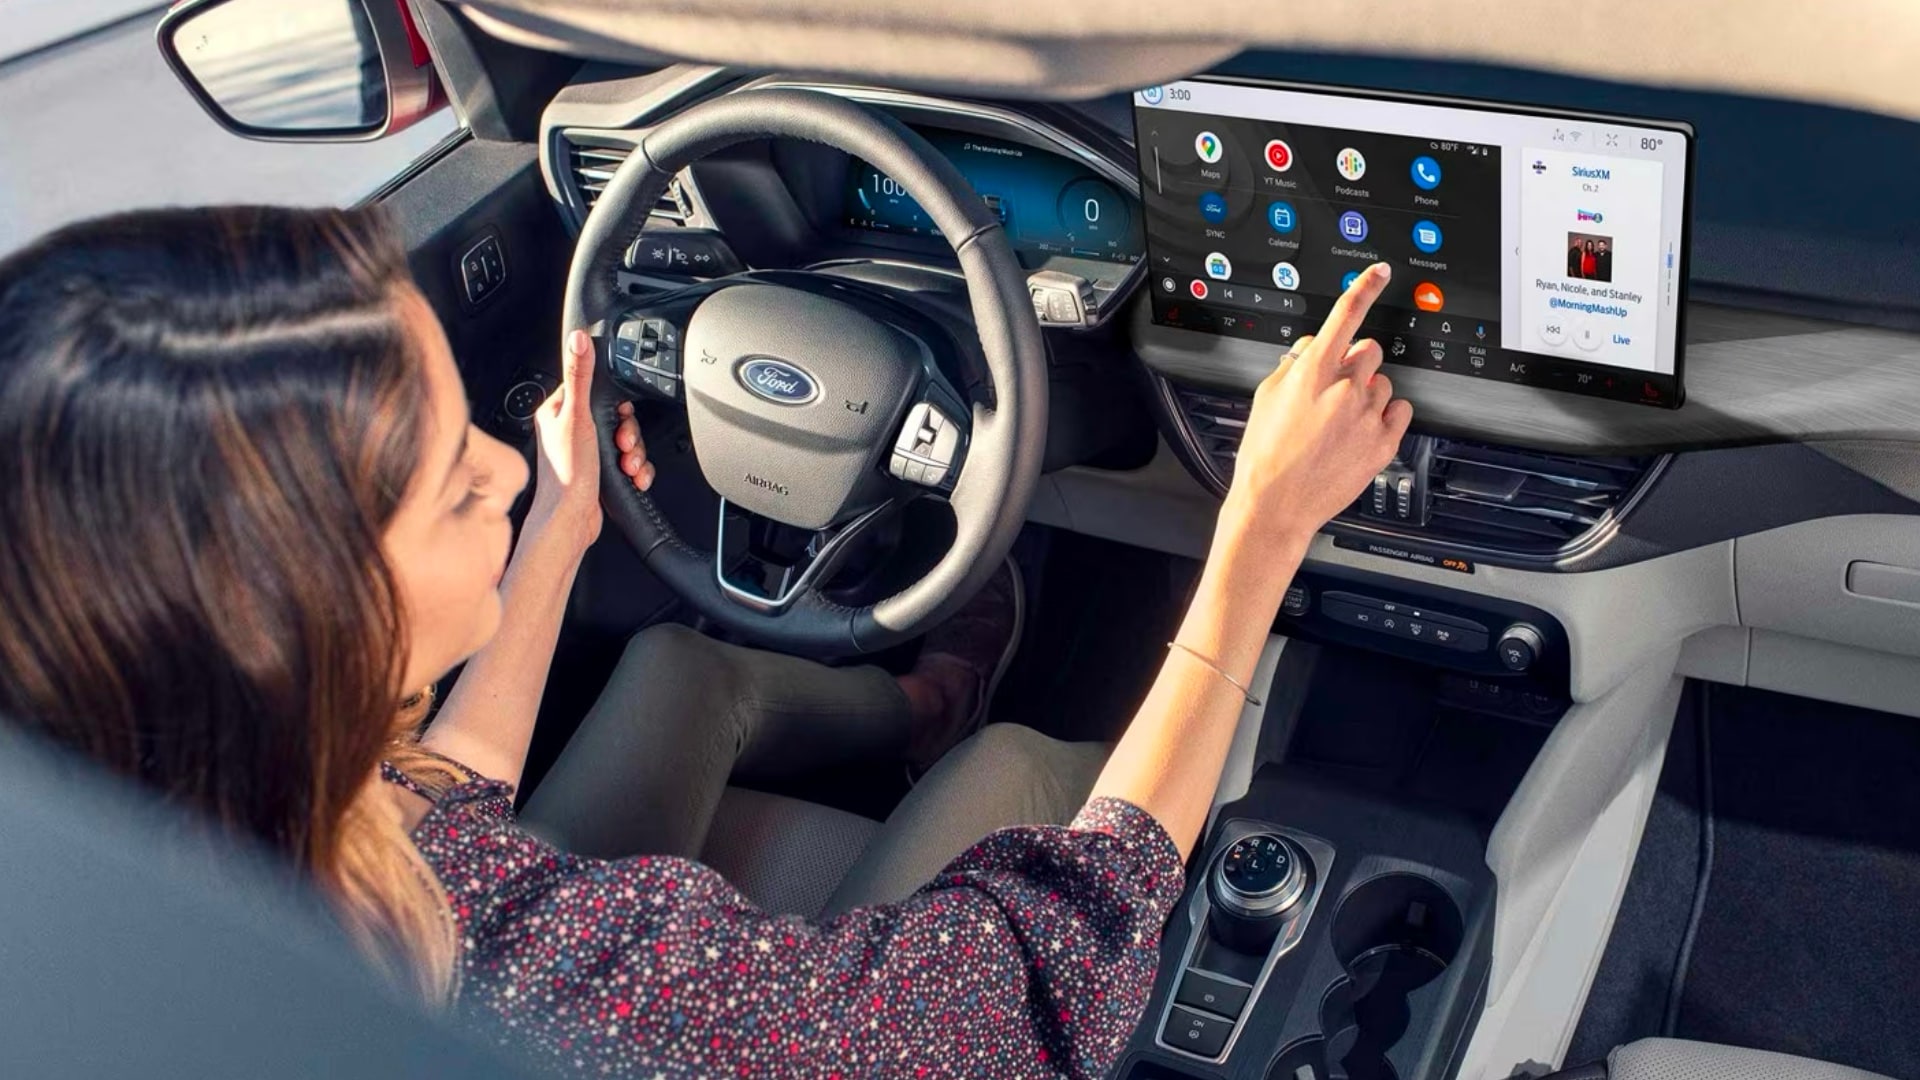 A woman sits in the driver's seat of a Ford using the touch screen displaying the Android Auto interface